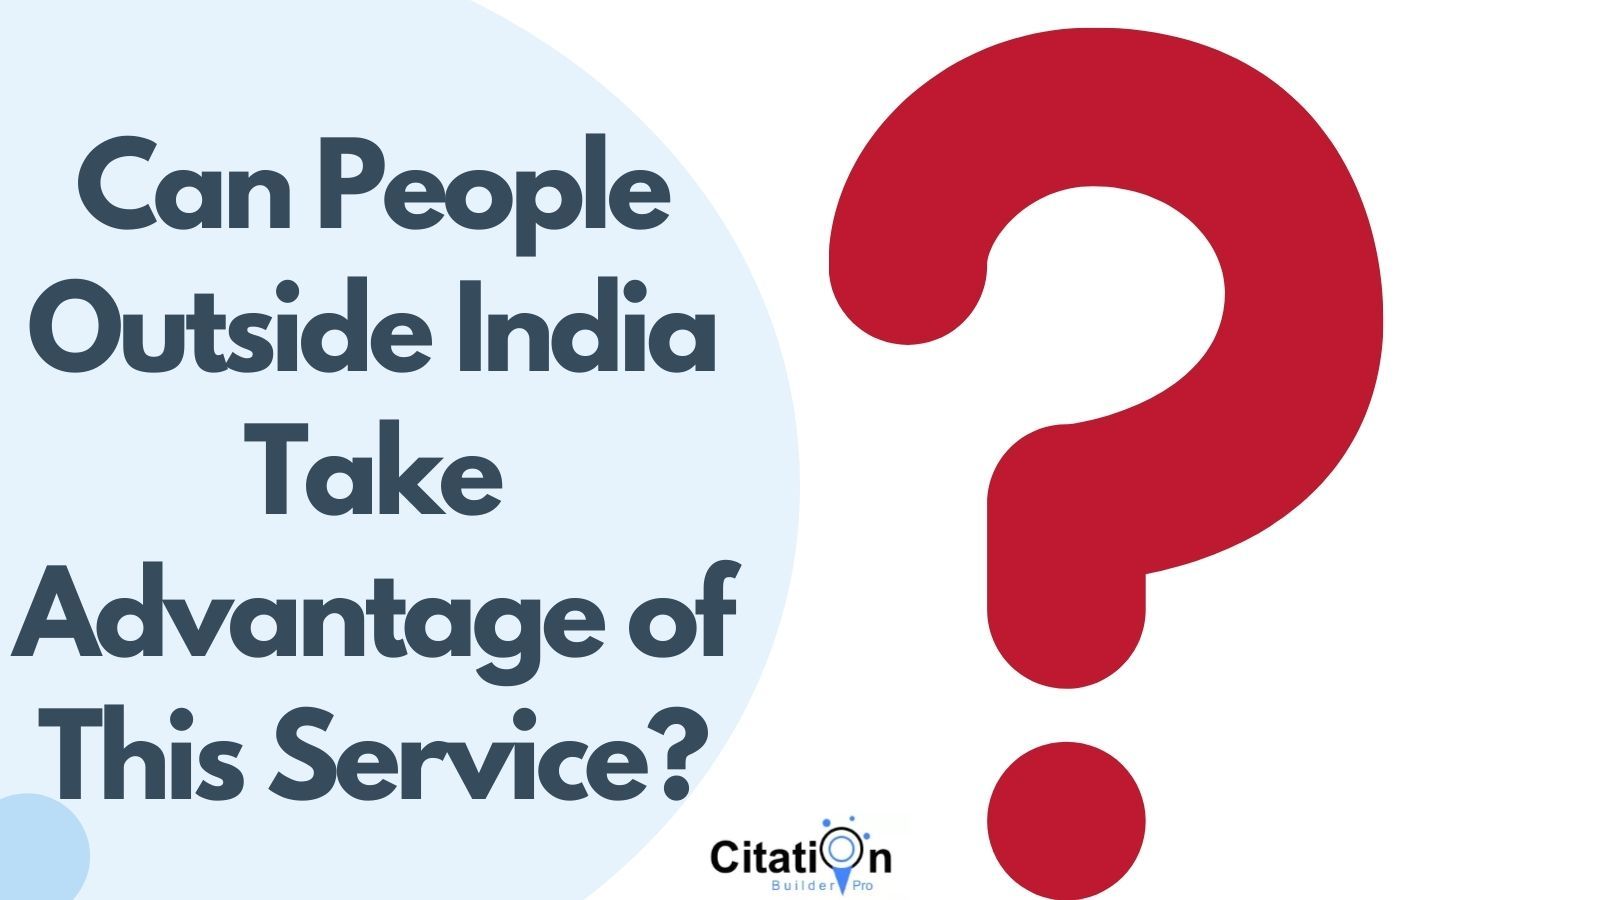 Can People Outside India Take Advantage of This Service